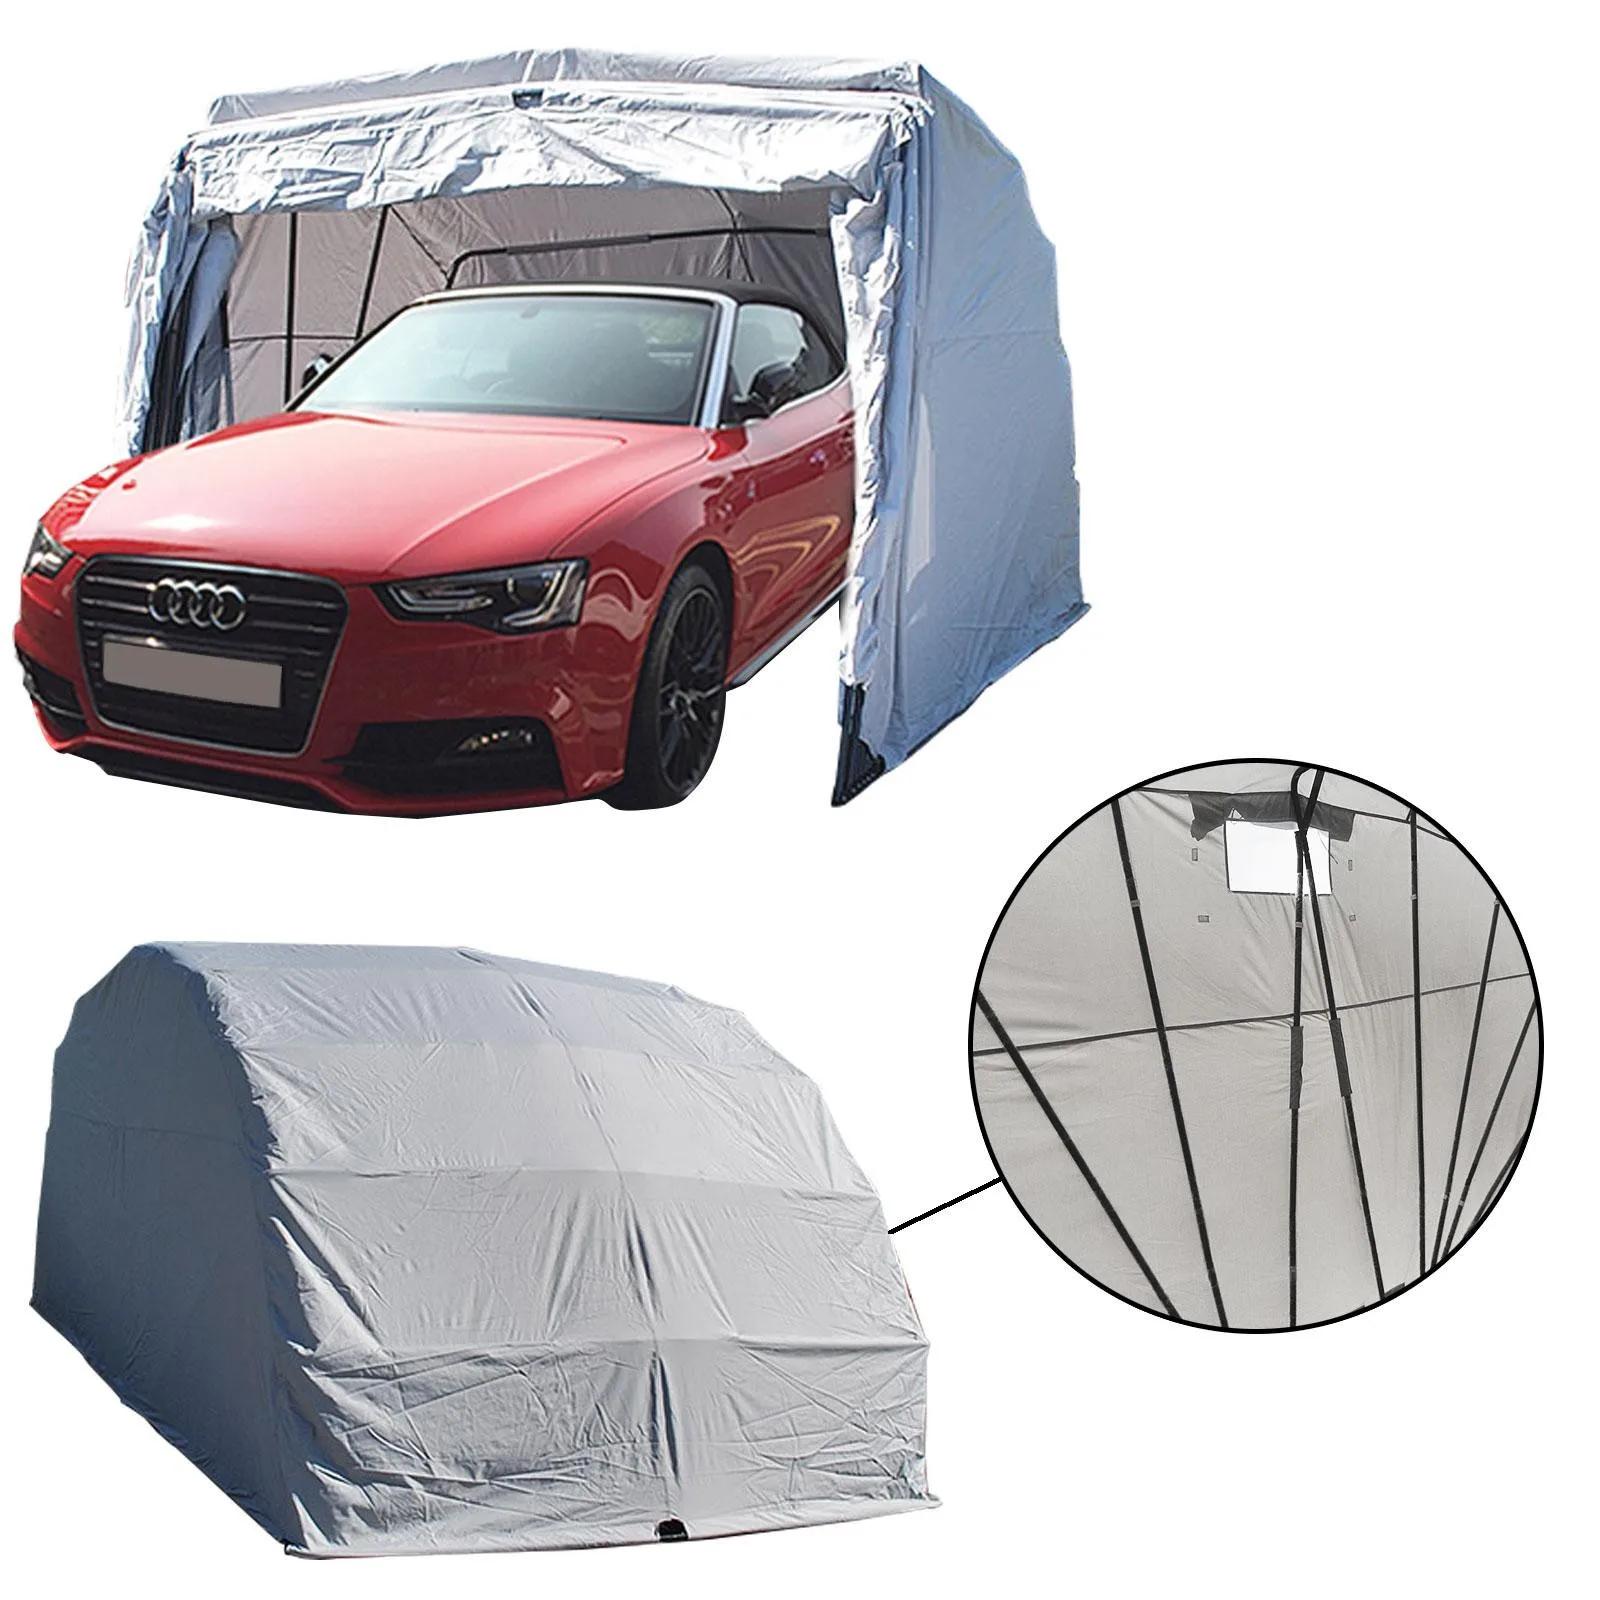 Waterproof Garage Folding Heated Fabric Auto Shelter Body Car Covers 600d Oxford With Pvc Coated